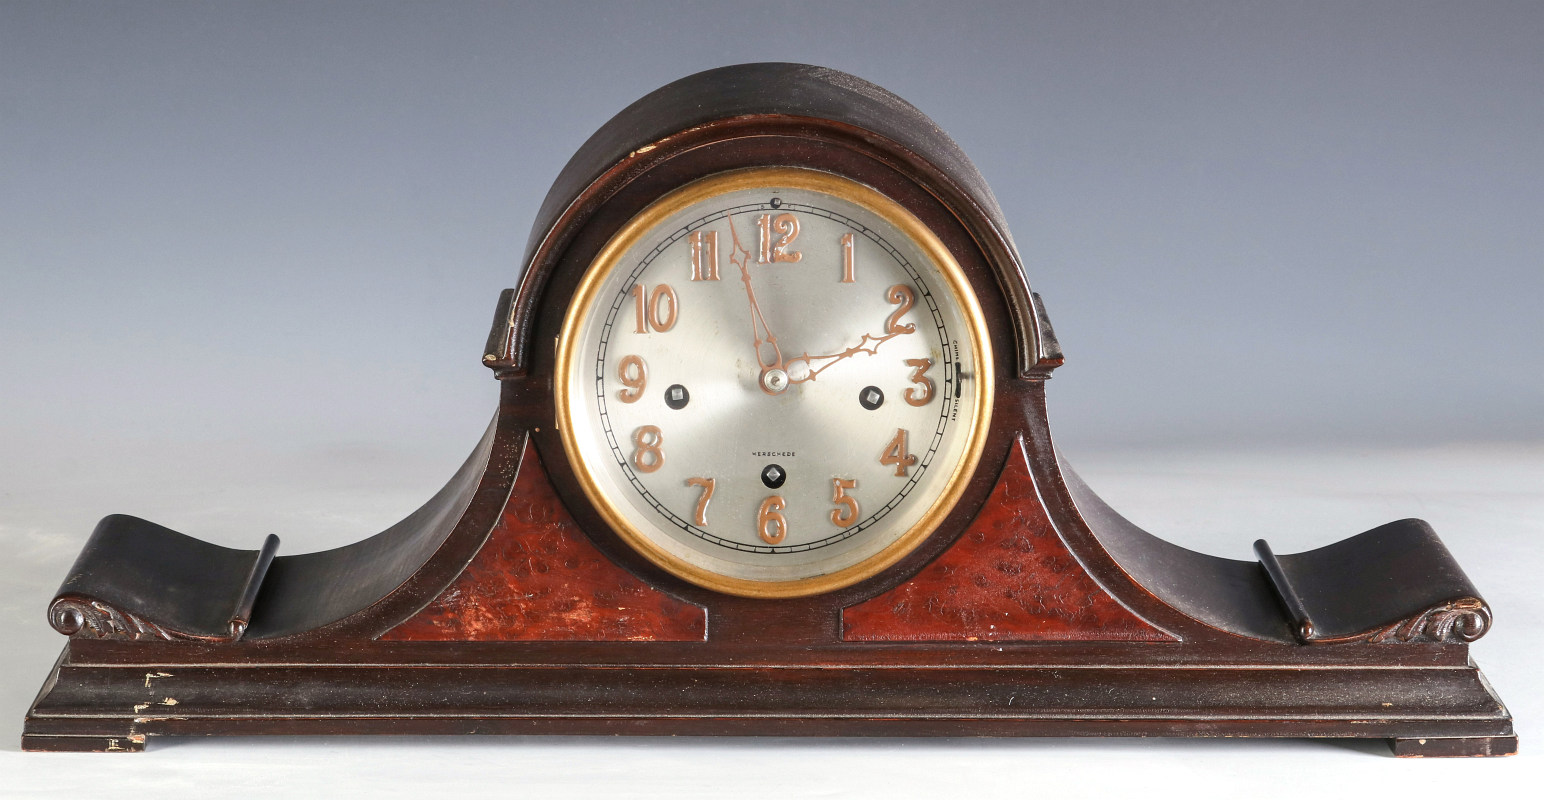 A HERSCHEDE TAMBOUR CLOCK WITH WESTMINSTER CHIME